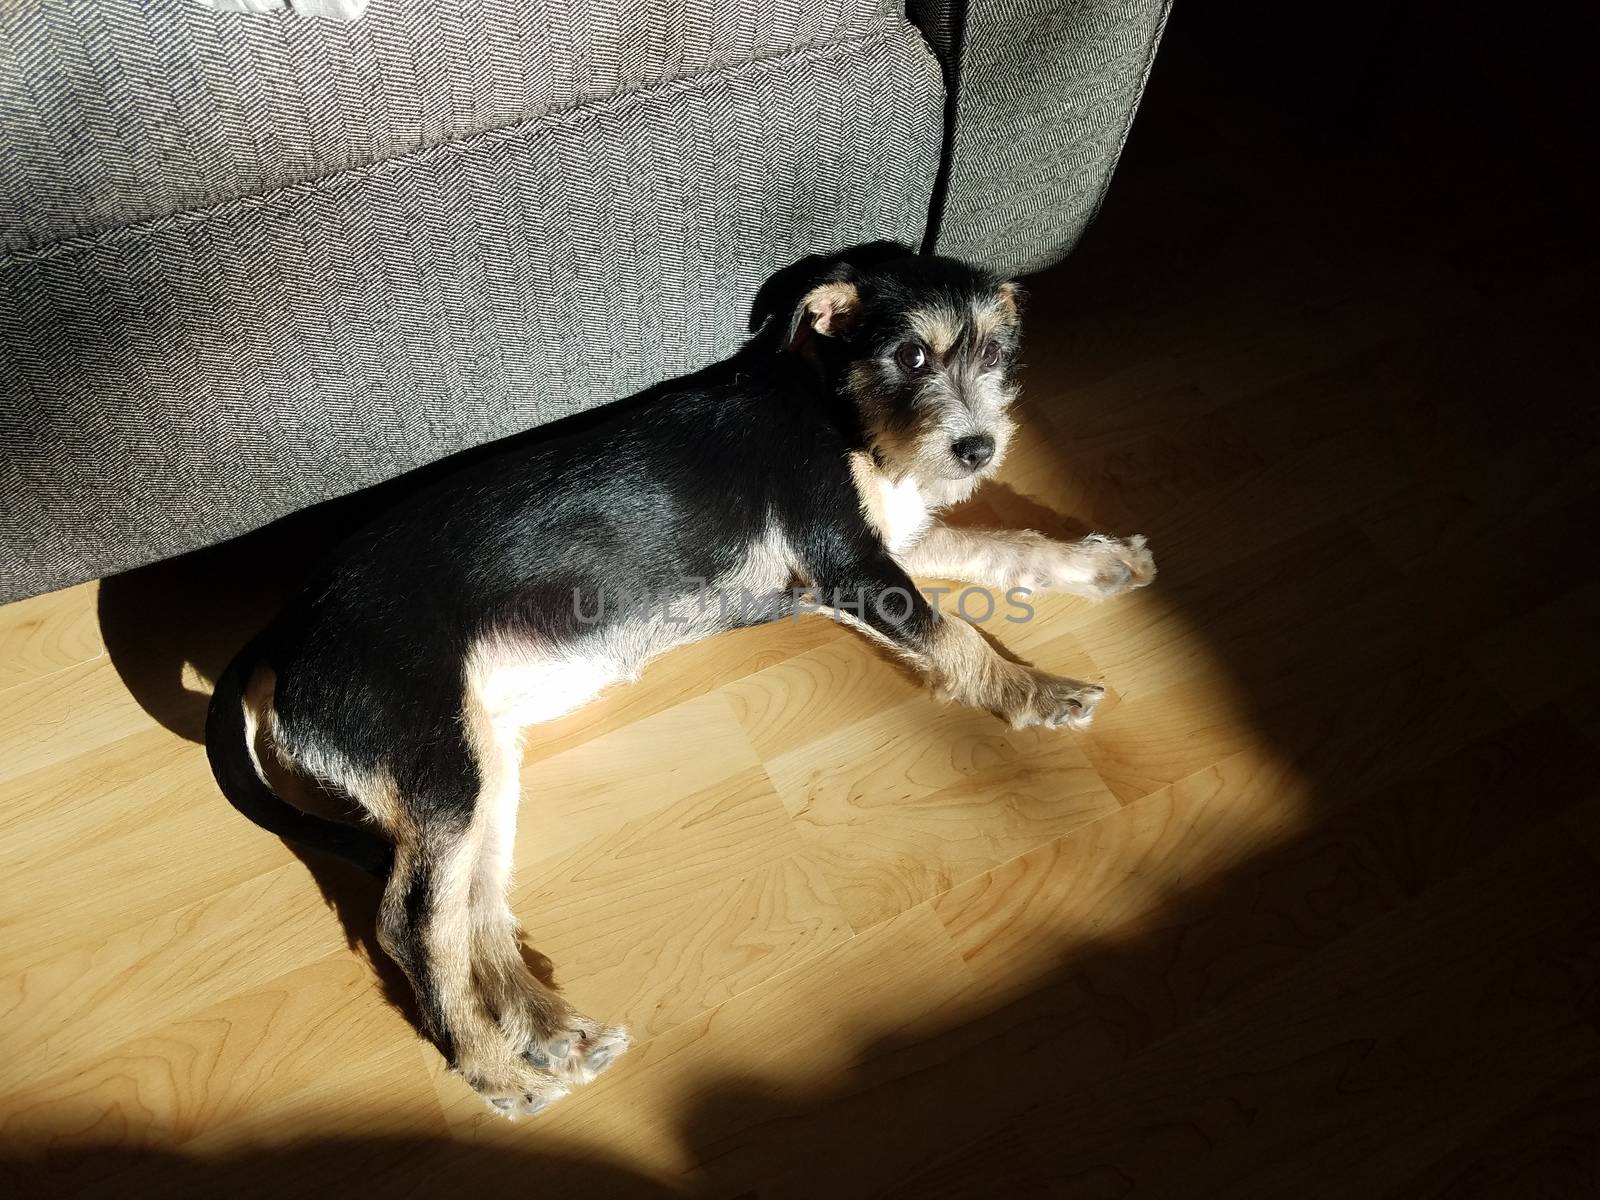 black and white dog relaxing in sun beam on wood floor by stockphotofan1